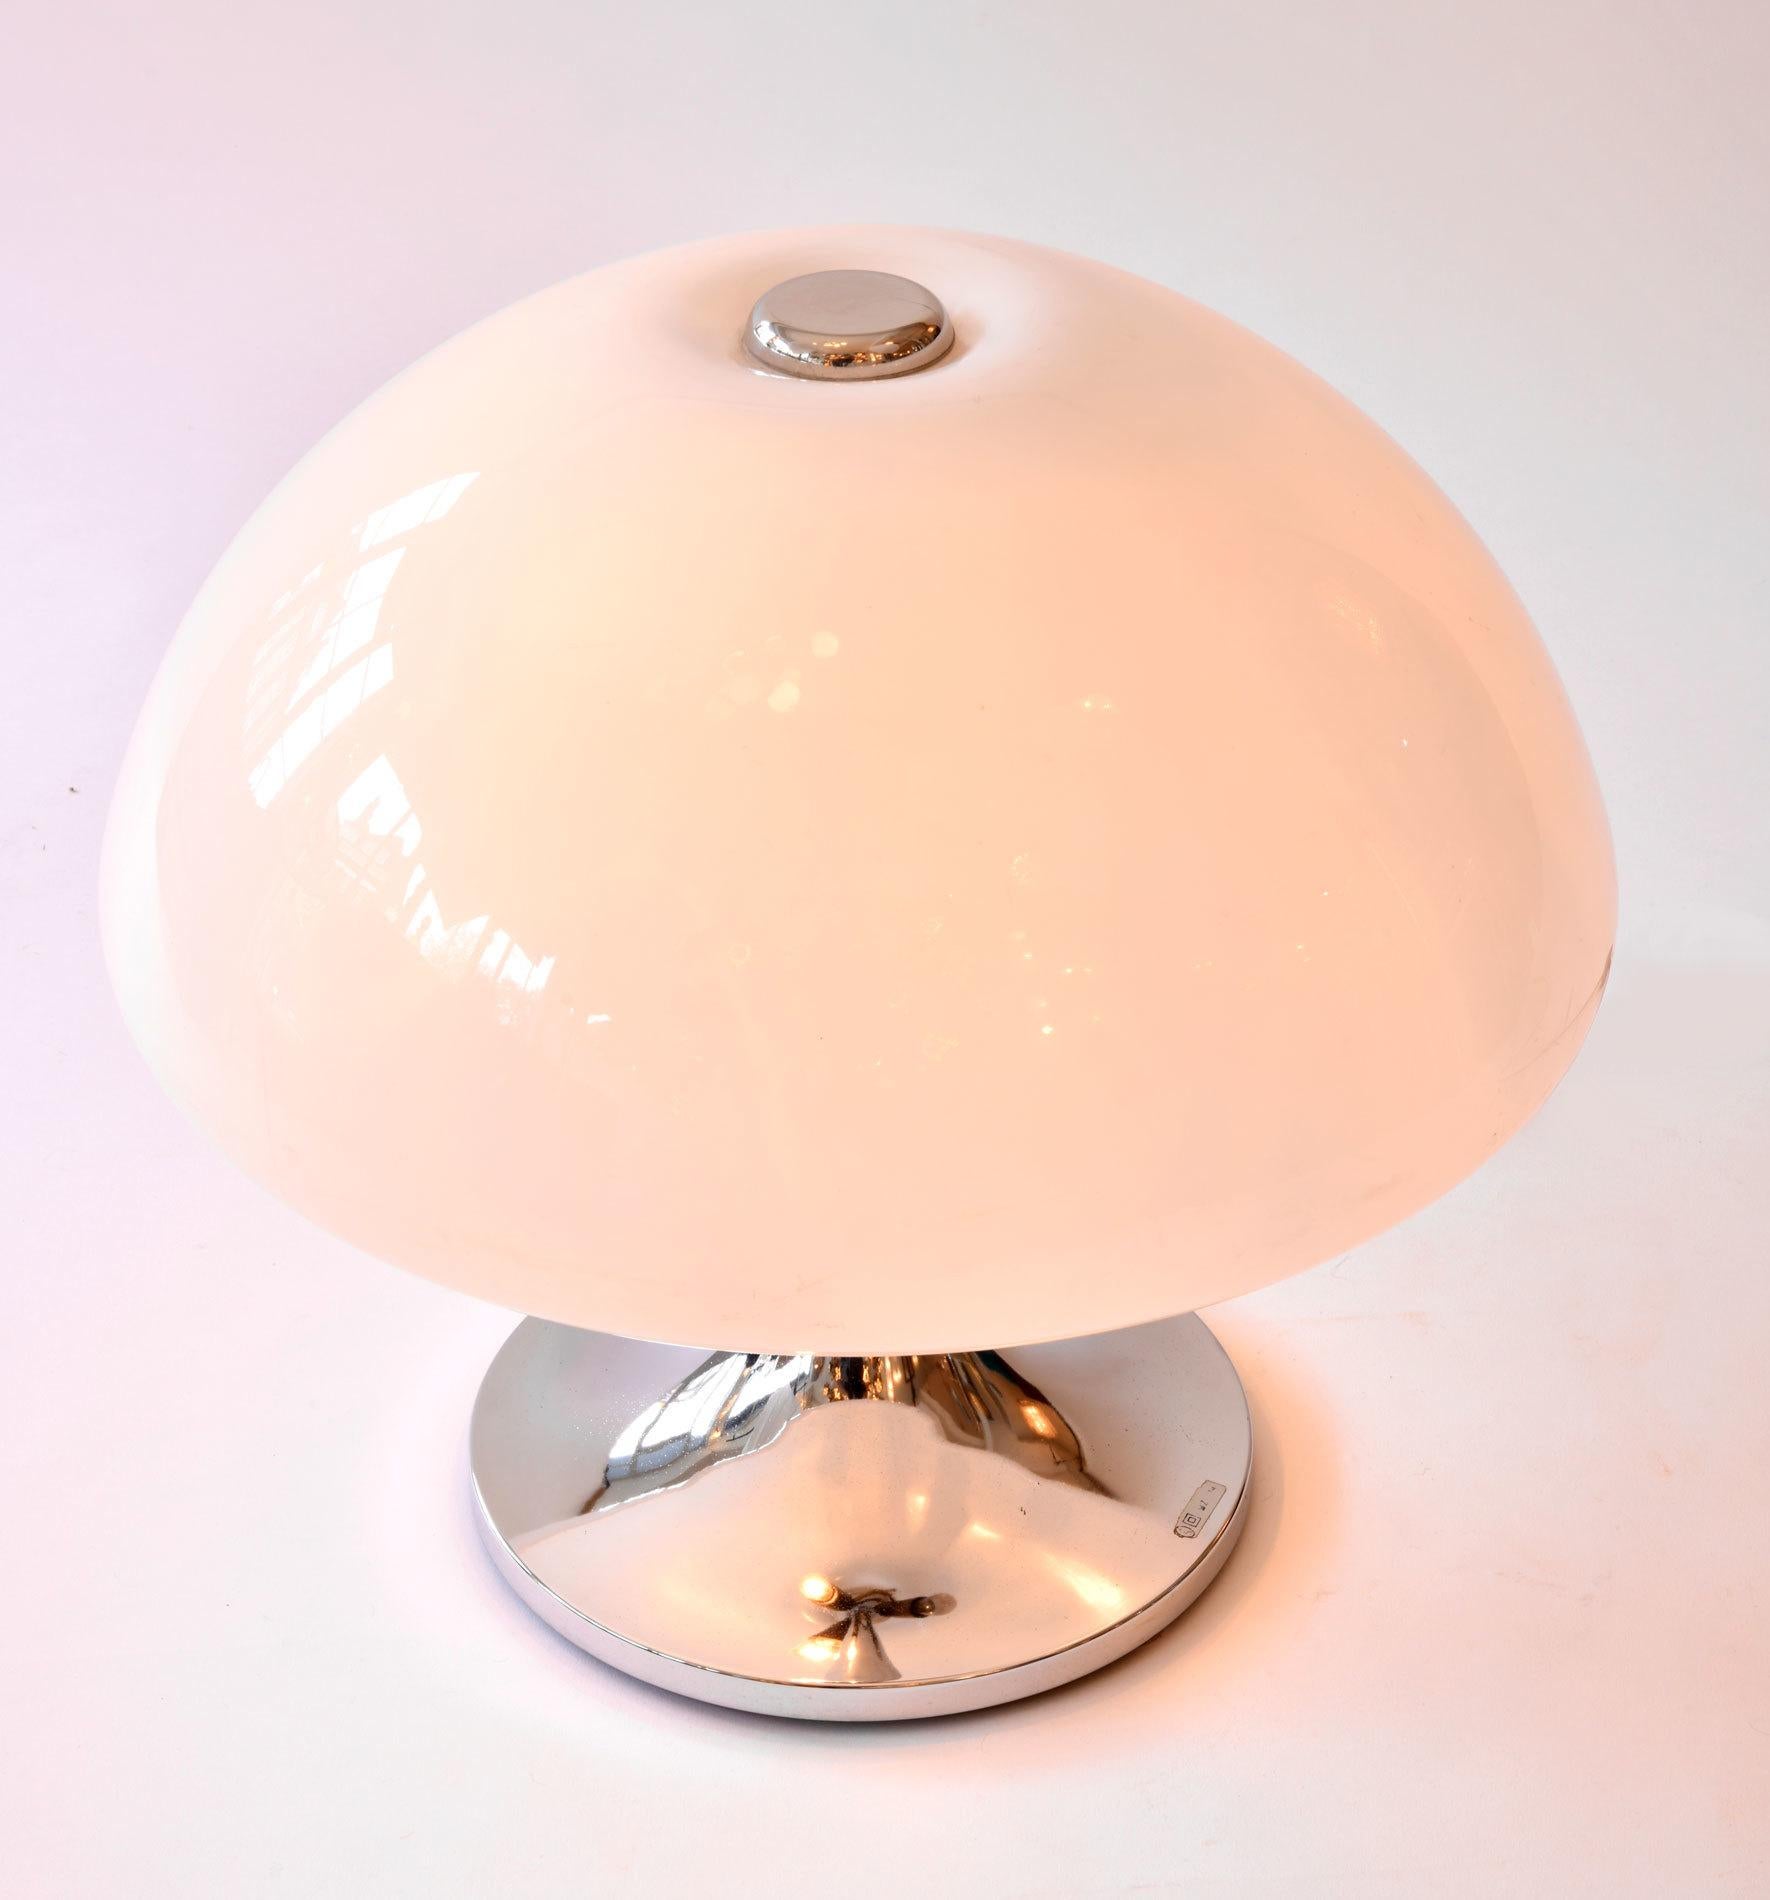 Curvaceous table lamp with domed acrylic shade topped with decorative chrome disk.
Sits on curved base.